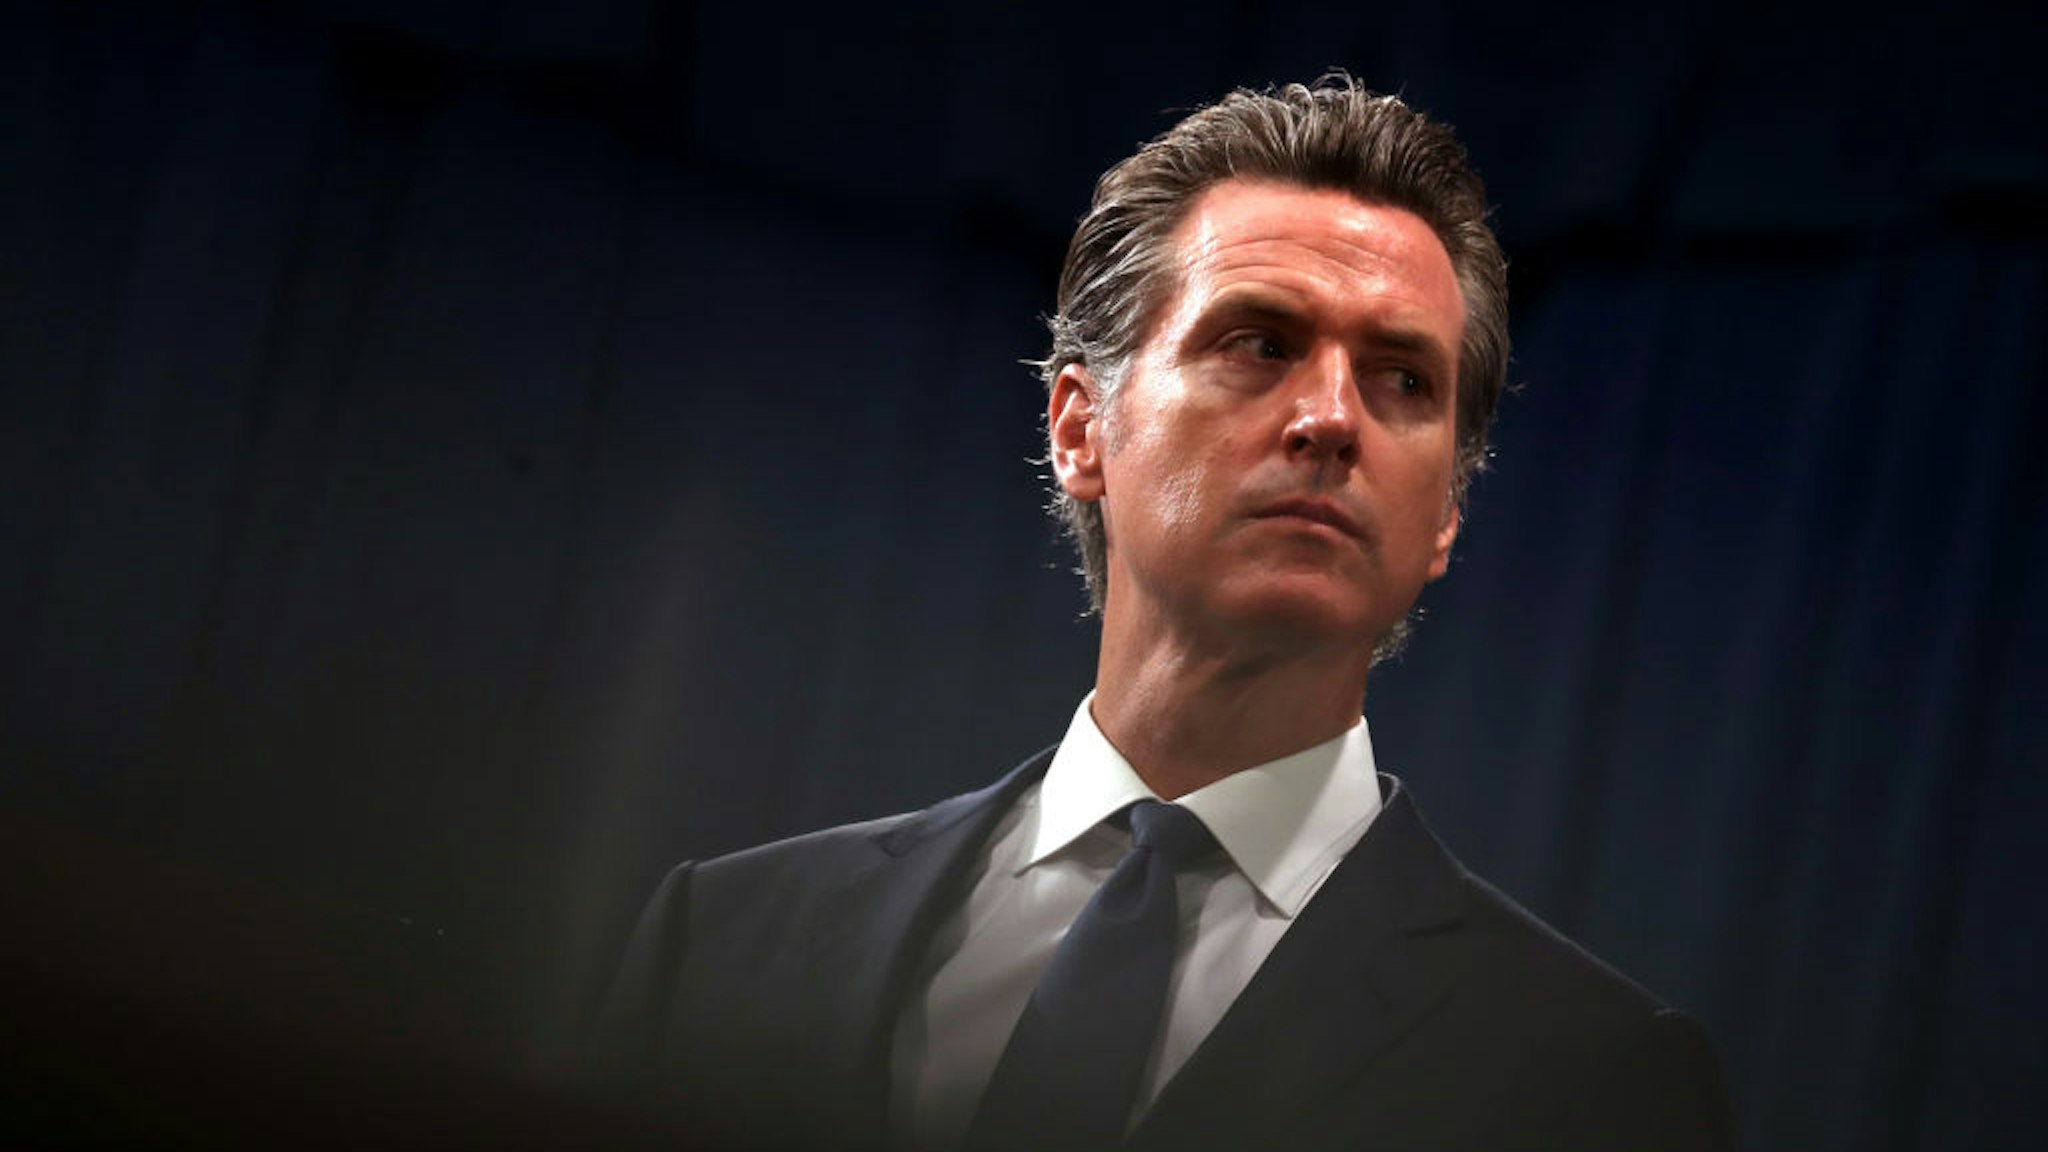 SACRAMENTO, CALIFORNIA - AUGUST 16: California Gov. Gavin Newsom looks on during a news conference with California attorney General Xavier Becerra at the California State Capitol on August 16, 2019 in Sacramento, California. California attorney genera Xavier Becerra and California Gov. Gavin Newsom announced that the State of California is suing the Trump administration challenging the legality of a new "public charge" rule that would make it difficult for immigrants to obtain green cards who receive public assistance like food stamps and Medicaid.